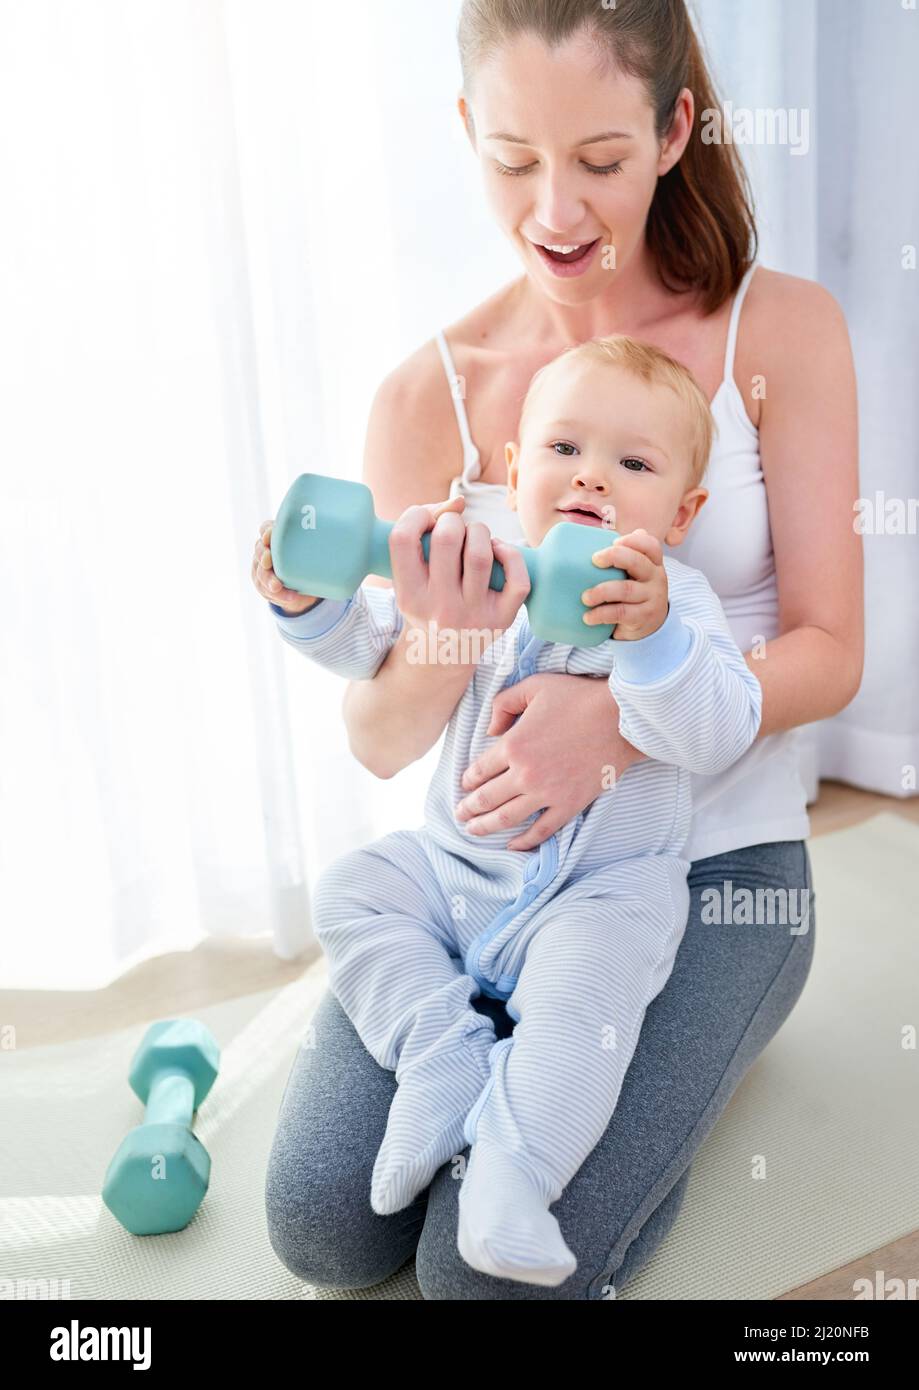 Whats your superpower. Shot of a young woman working out while spending time with her baby boy. Stock Photo